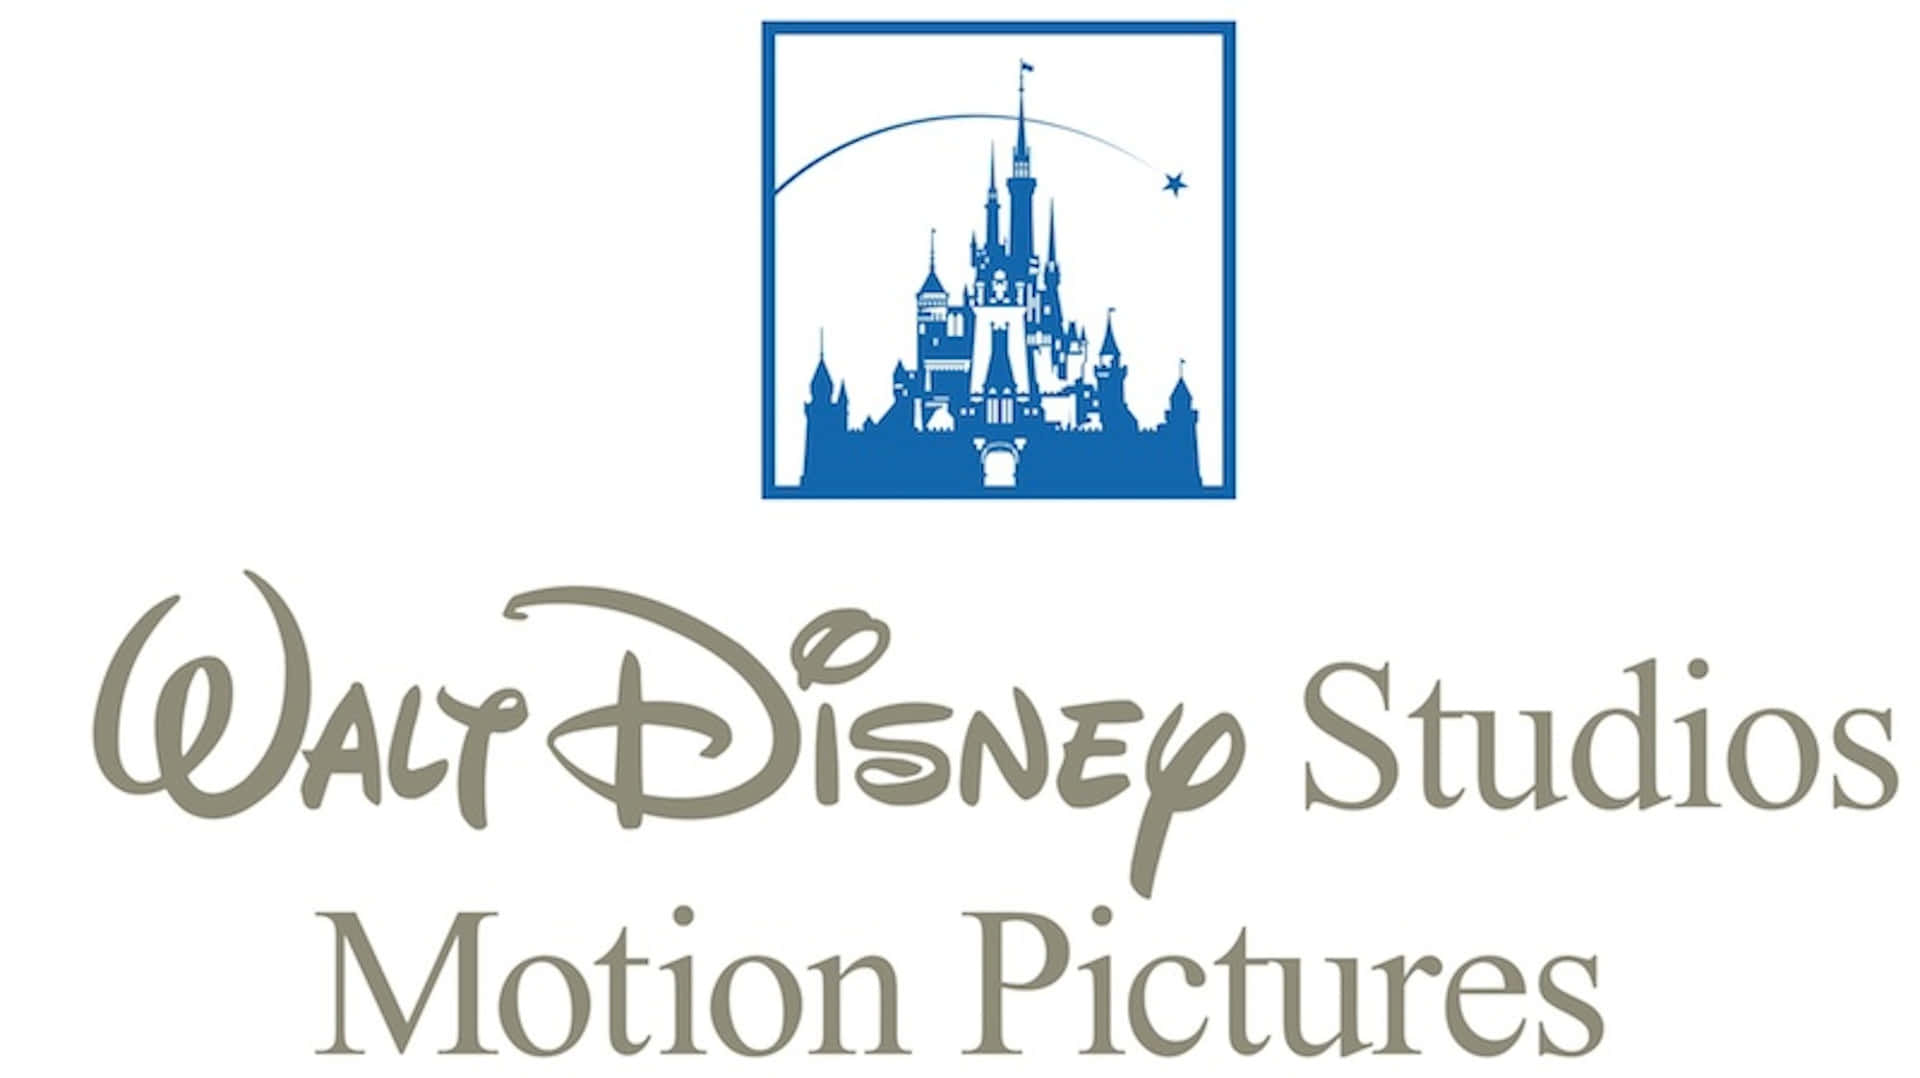 Walt Disney Studios Motion Pictures: A World of Adventure and Imagination